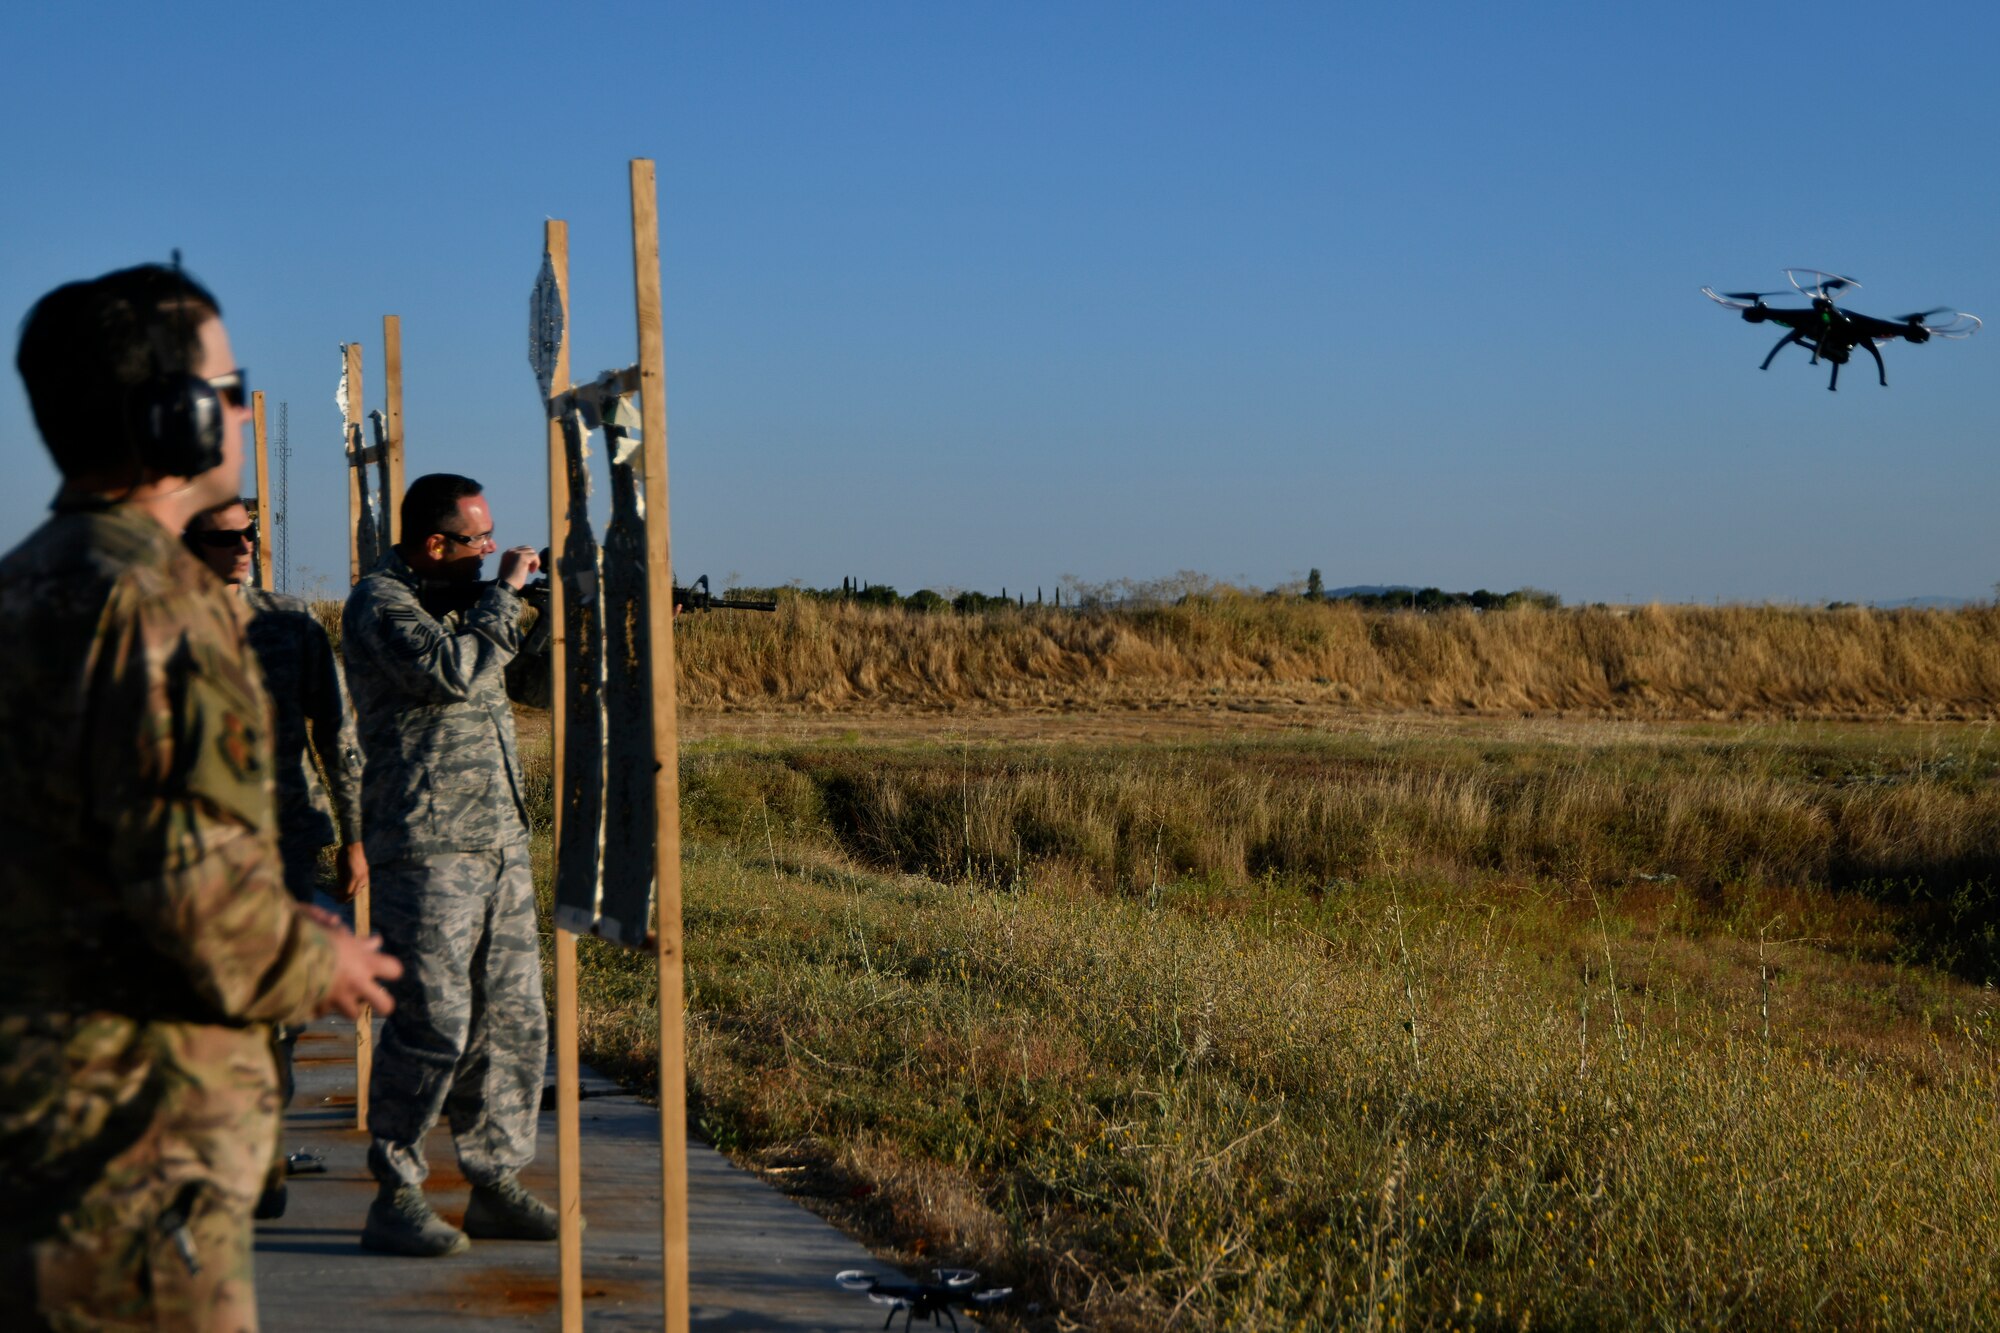 Staff Sgt. Colton Becker, 9th Security Forces Squadron training flight, controls a drone takeoff while Chief Master Sgt. Dustin Hall, 9th Reconnaissance Wing command chief, charges his weapon and sets his sights using the Smart Shooter sighting device during a demonstration at Beale Air Force Base, California, Aug. 14, 2019. The 9th SFS Airmen have been using off the shelf commercial technology to help train and improve how their missions are conducted to protect the installation. (U.S. Air Force photo by Tech. Sgt. Alexandre Montes)